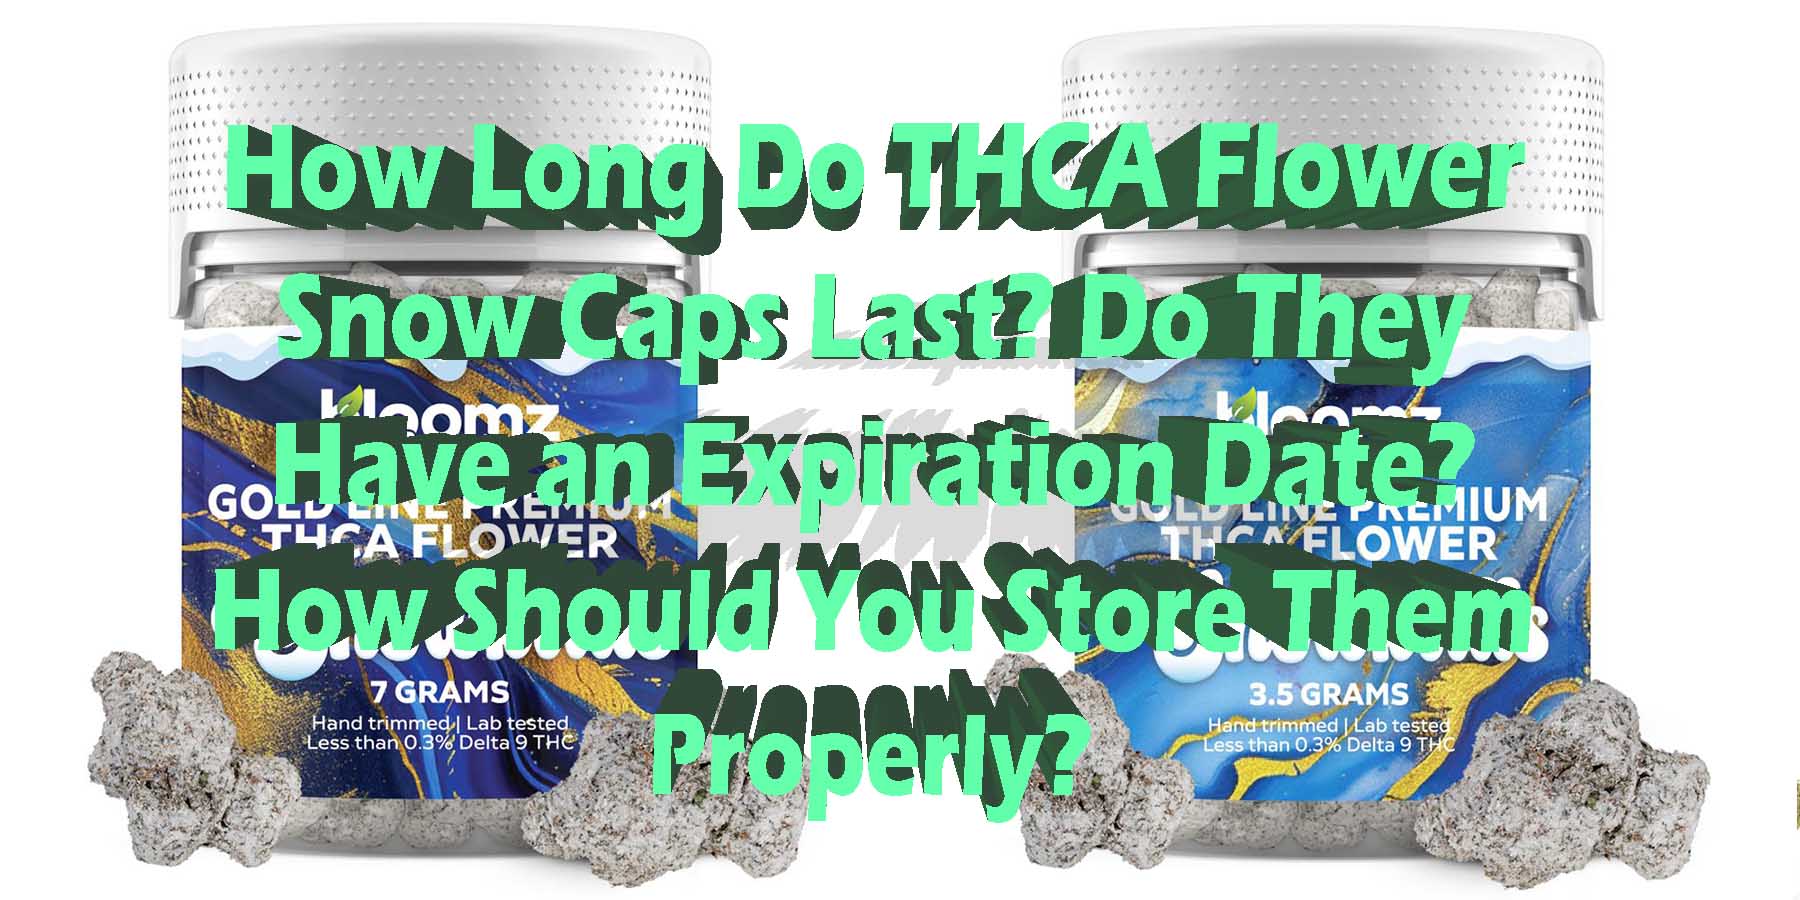 How Long Do THCA Flower Snow Caps Last Do They Have an Expiration Date How Should You Store Them Properly Coupon Discount